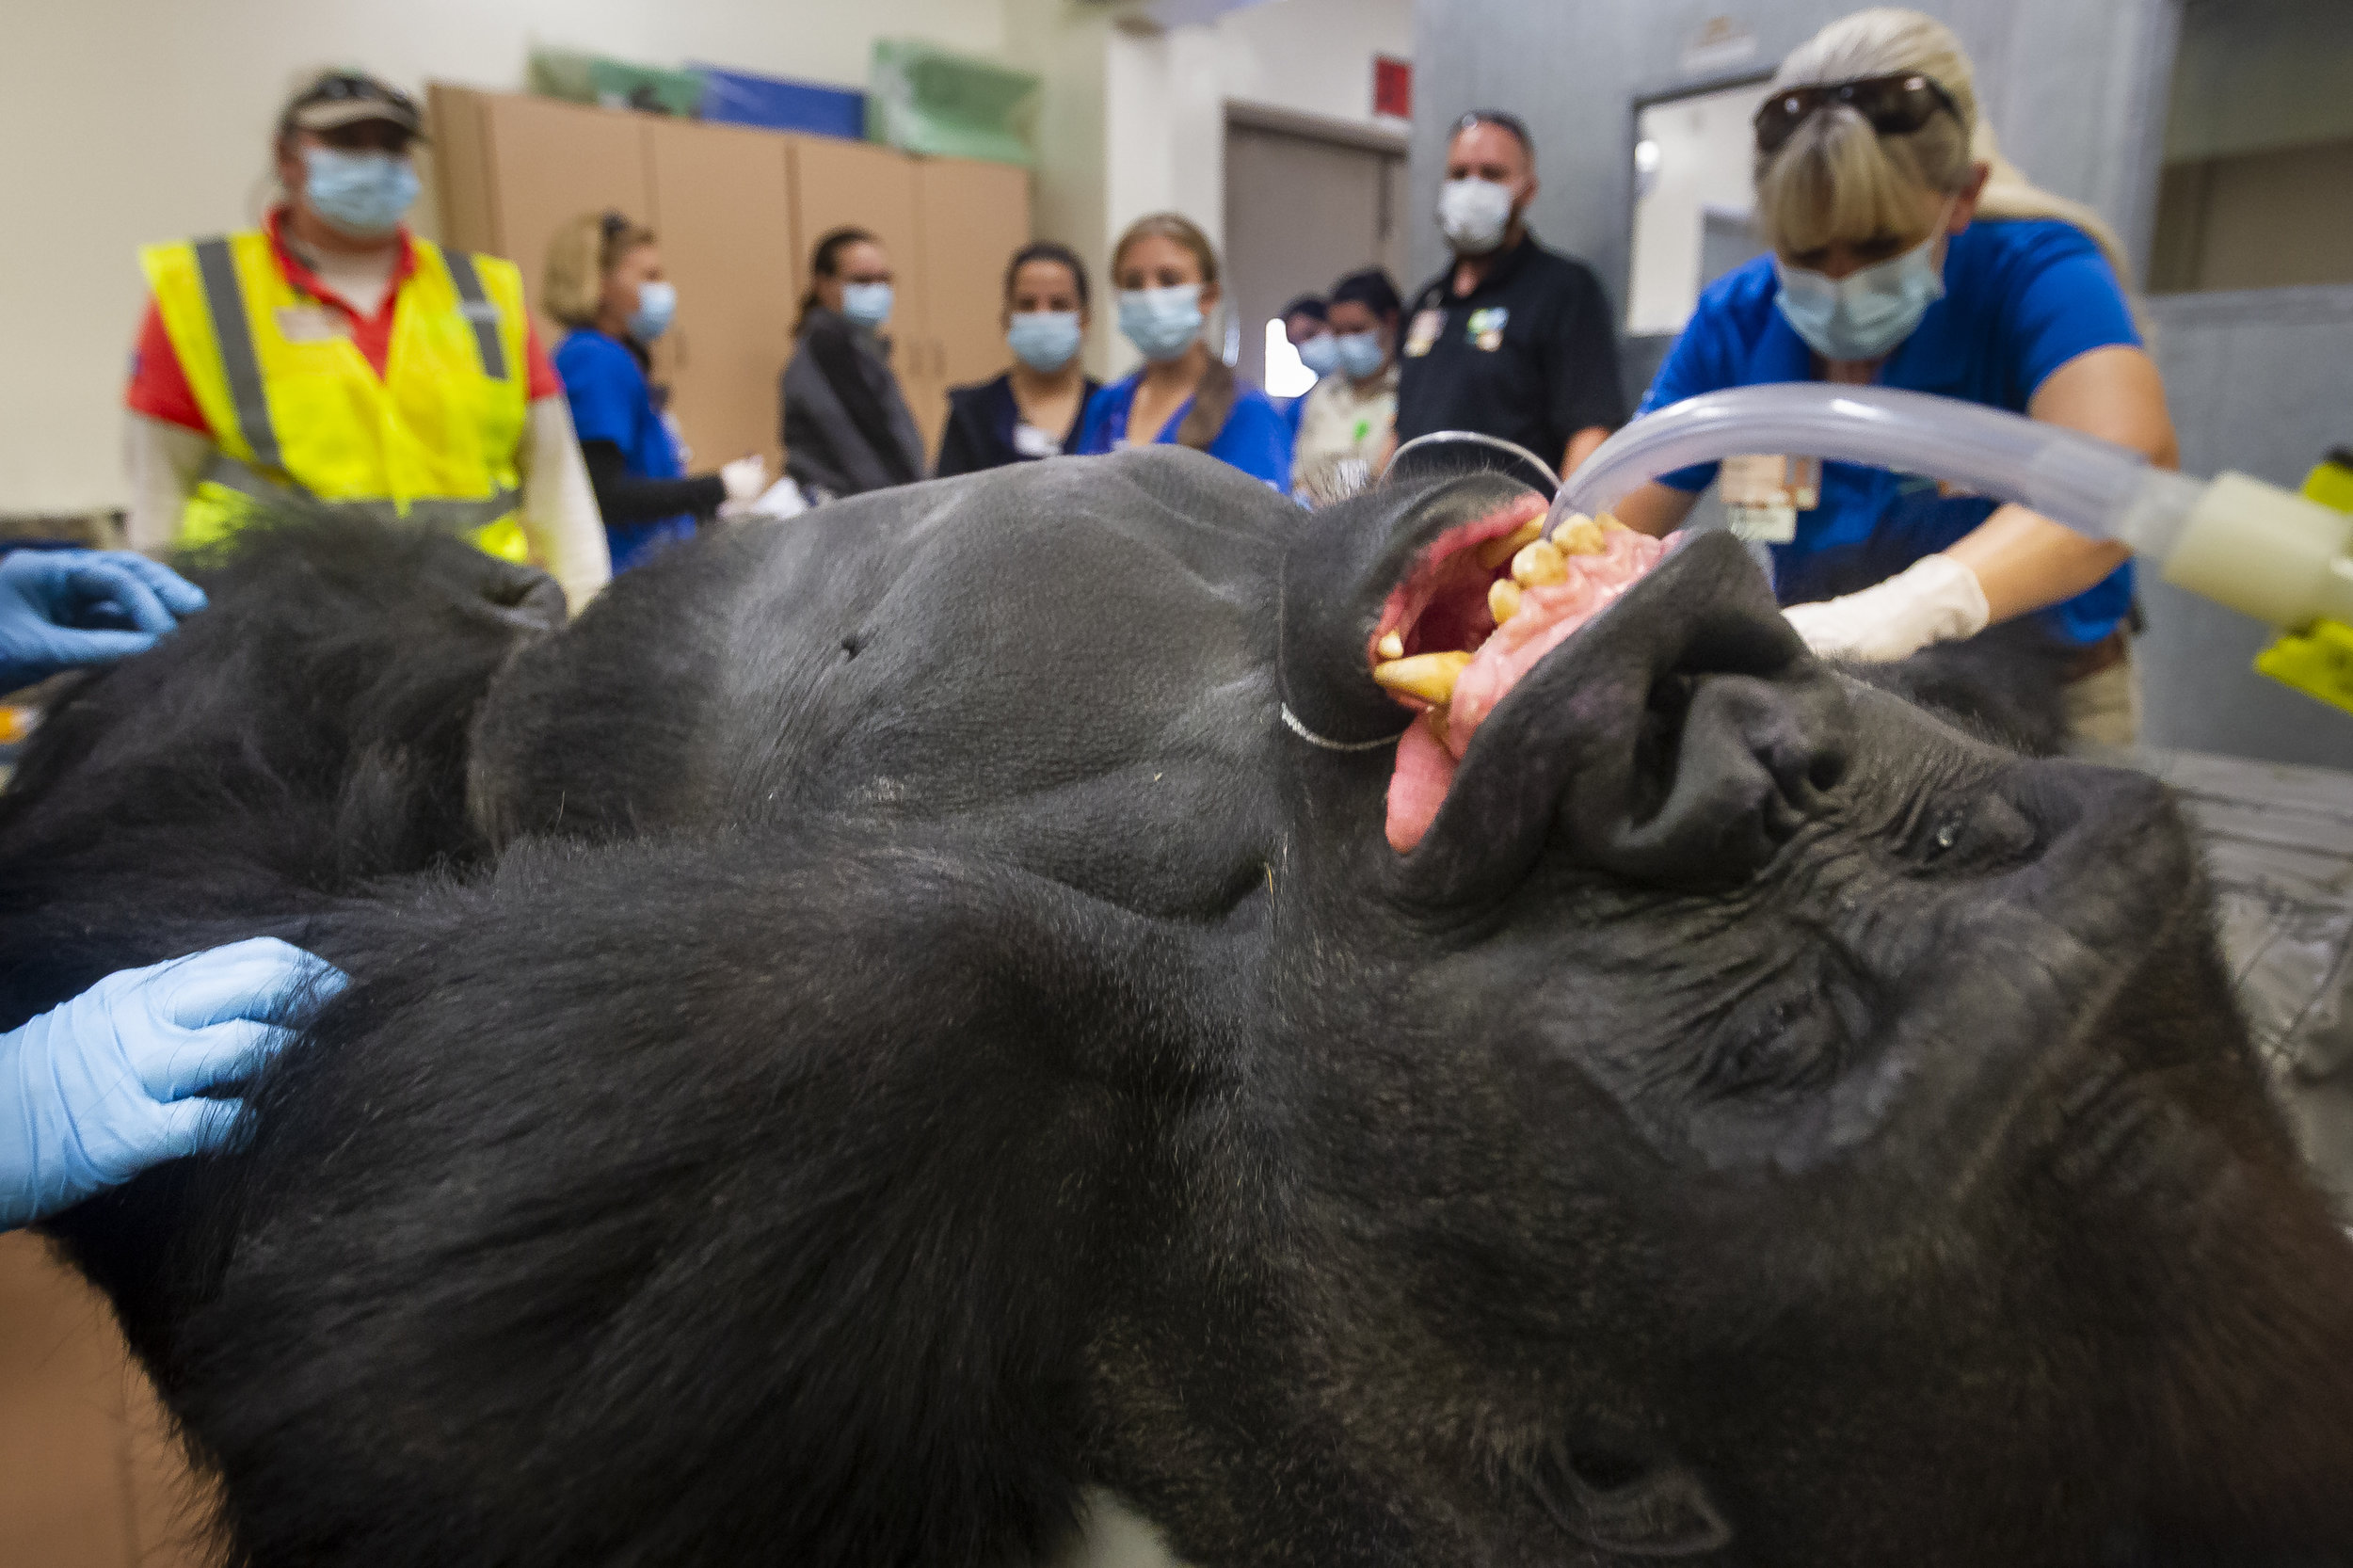  Barney, the 25-year-old silverback gorilla, gets his annual checkup at Zoo Miami on Tuesday, December 11, 2018. Zoo Keepers were concerned by Barney's persistent cough and after his examination they learned he has mites in his airways. 